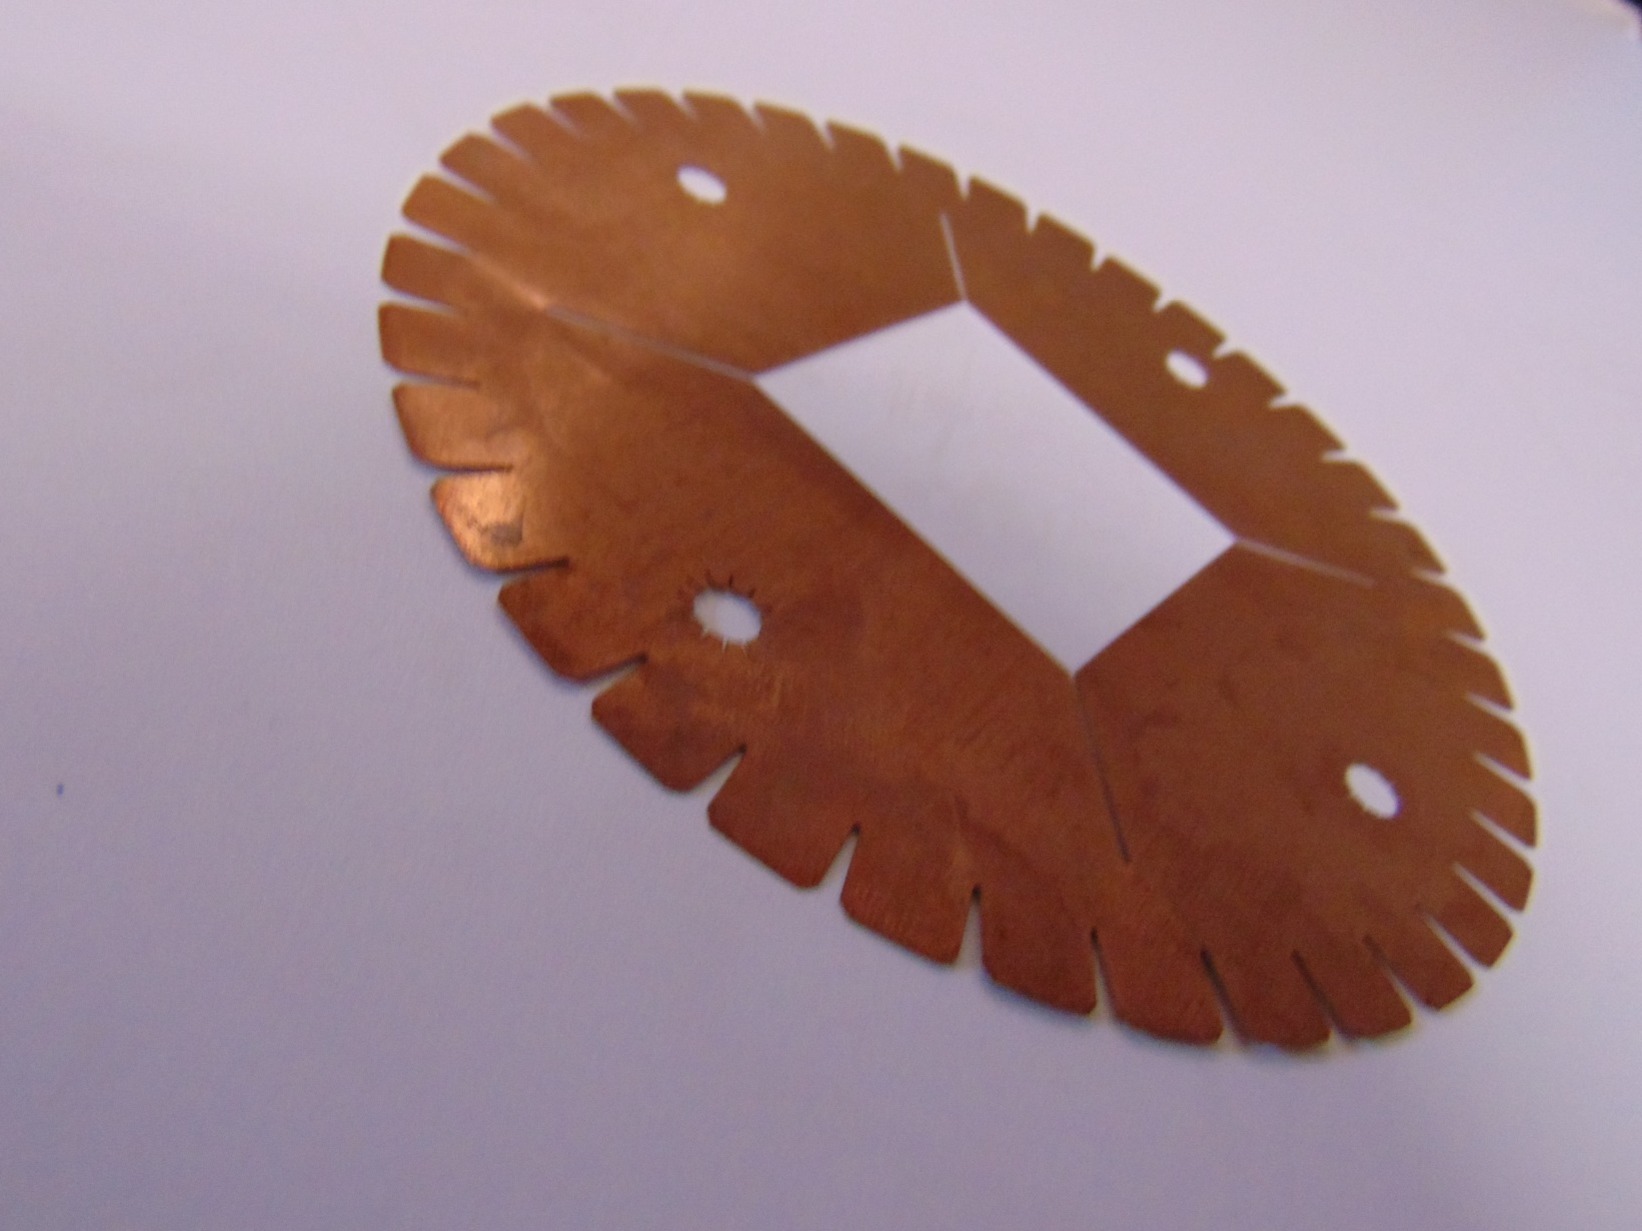 Etch Tech: Manufacturers of High Quality Shims and Washers, Made Using the Chemical Etching Process